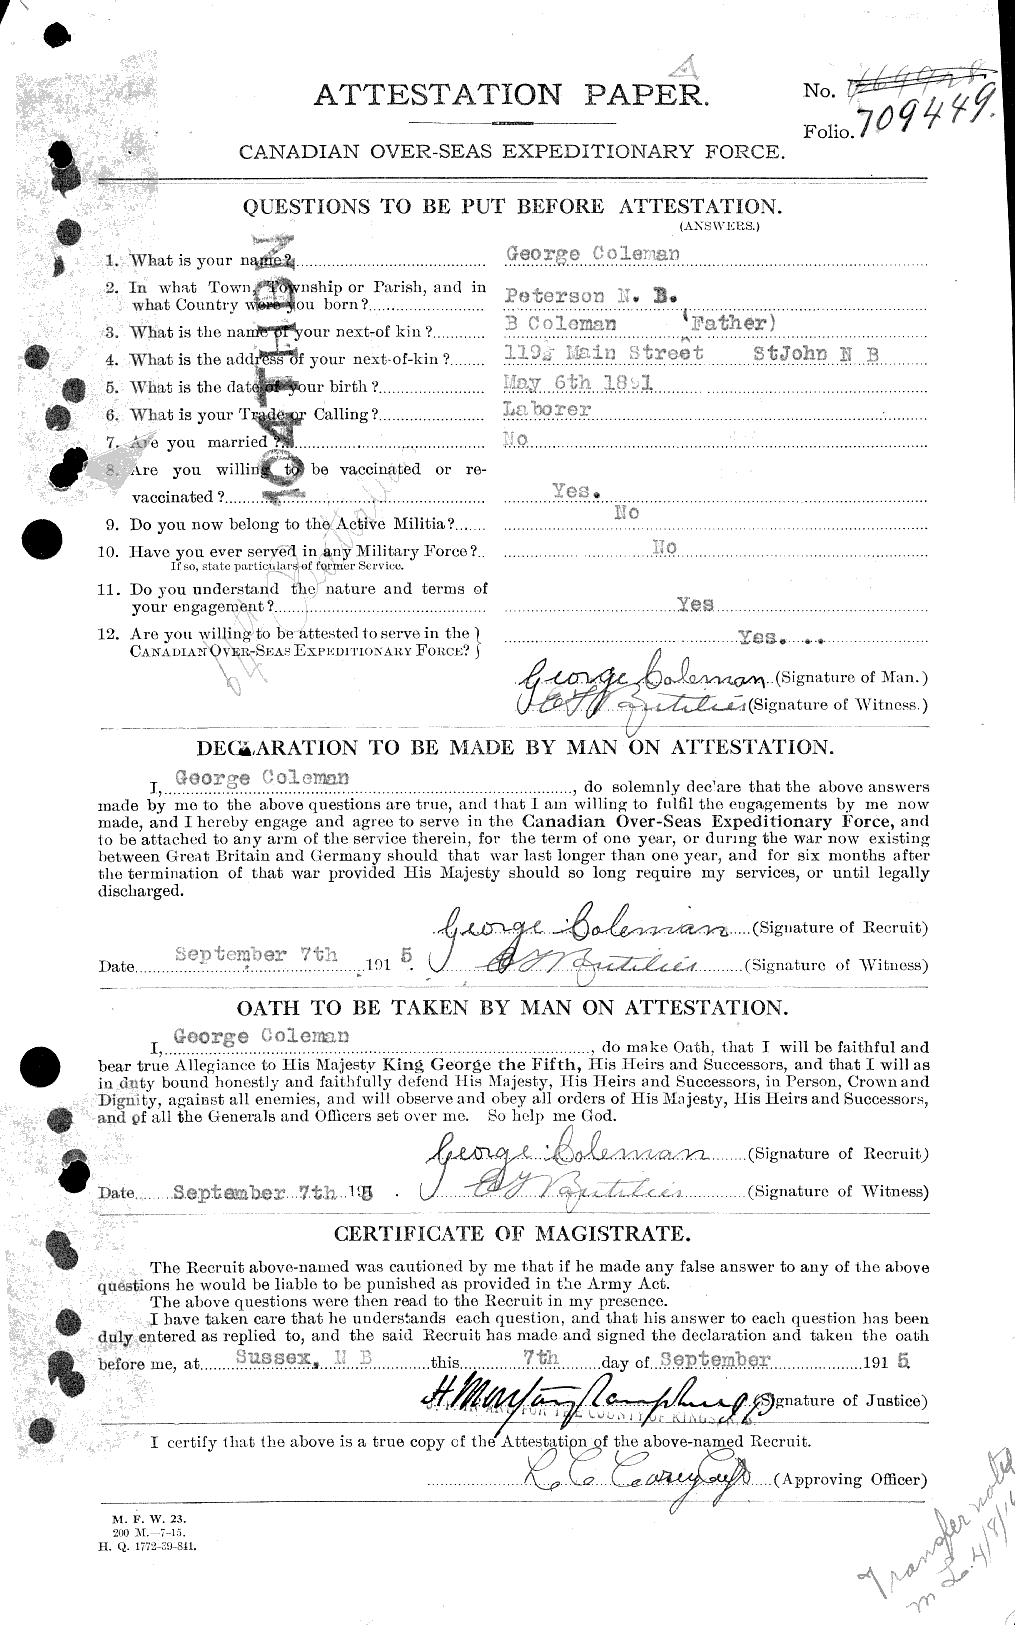 Personnel Records of the First World War - CEF 028153a